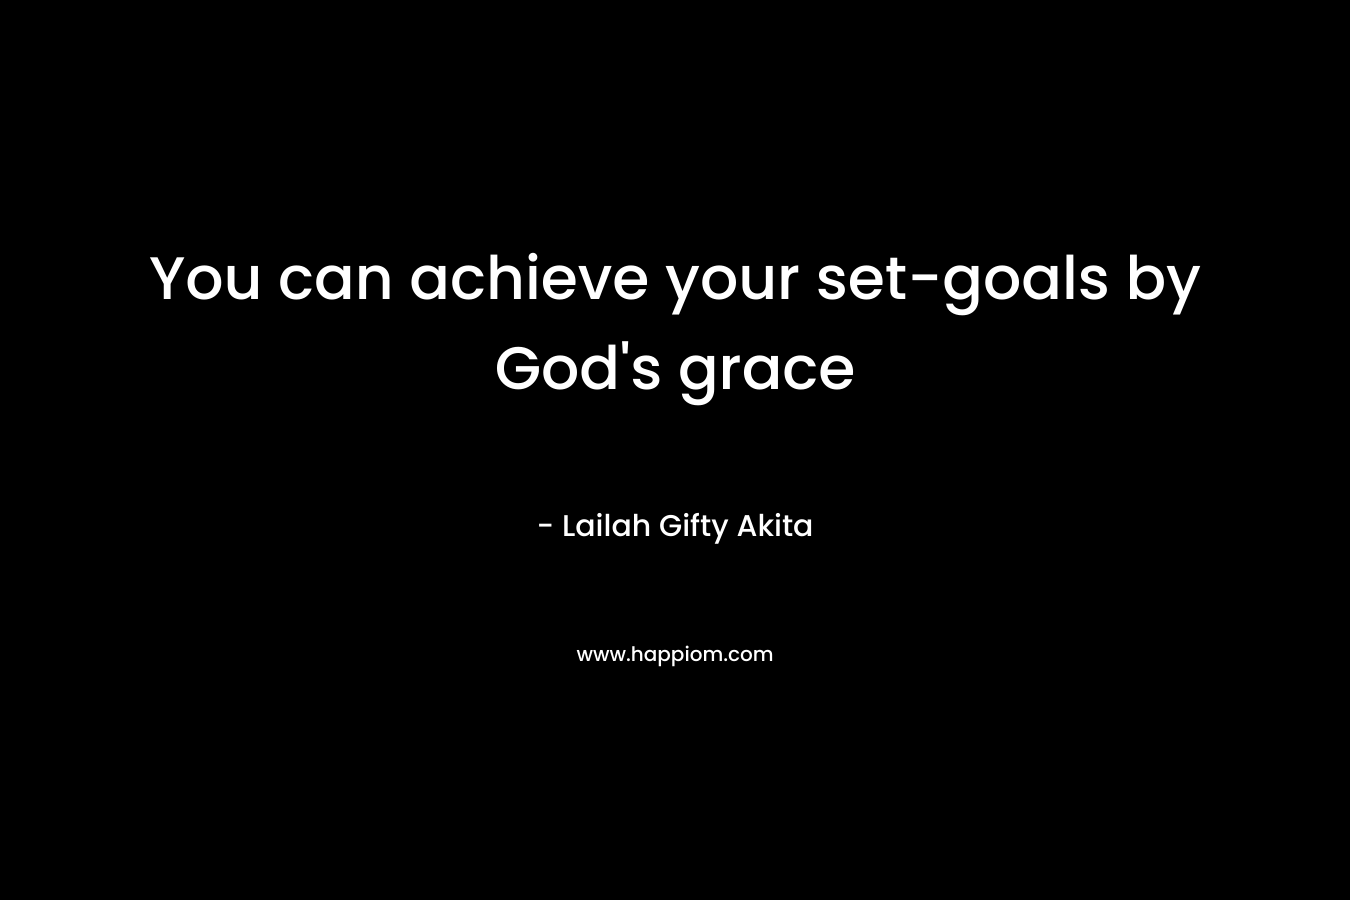 You can achieve your set-goals by God's grace